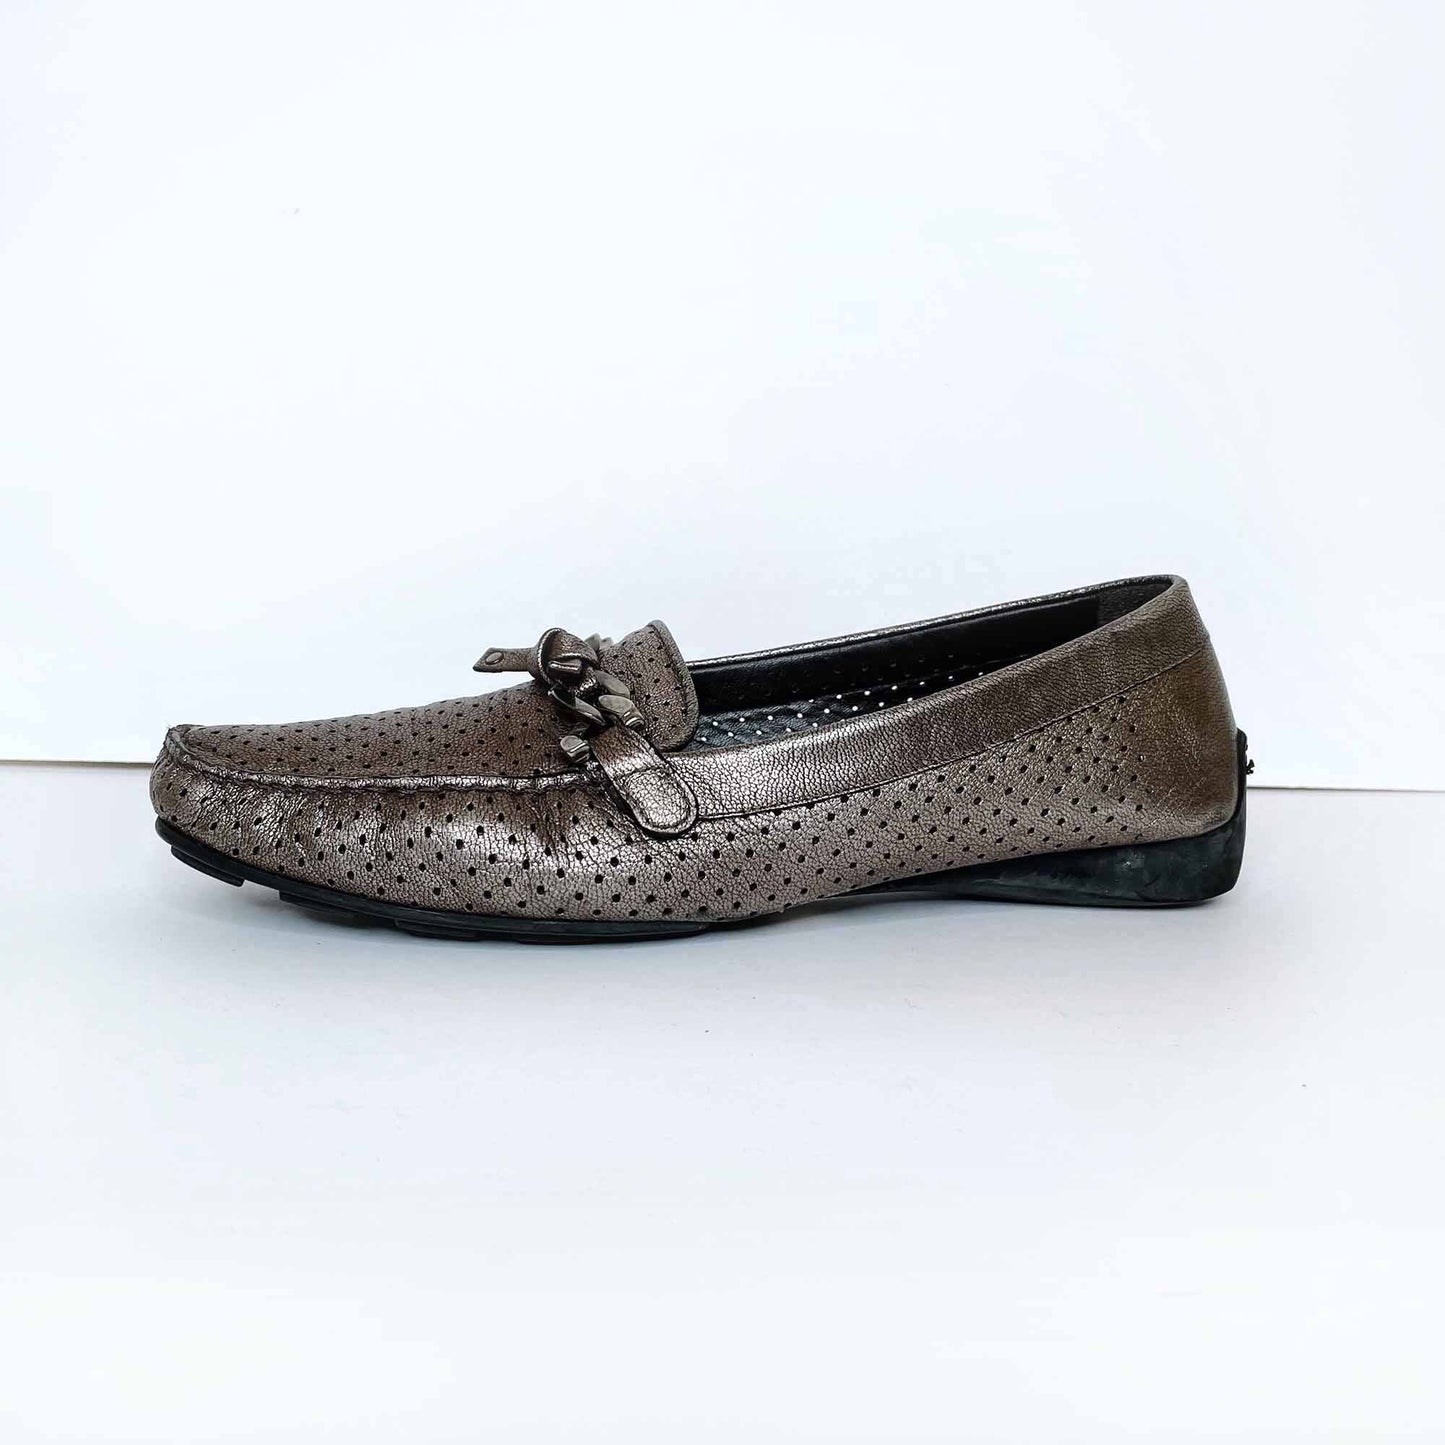 stuart weitzman bronzed leather perforated driving loafer - size 8